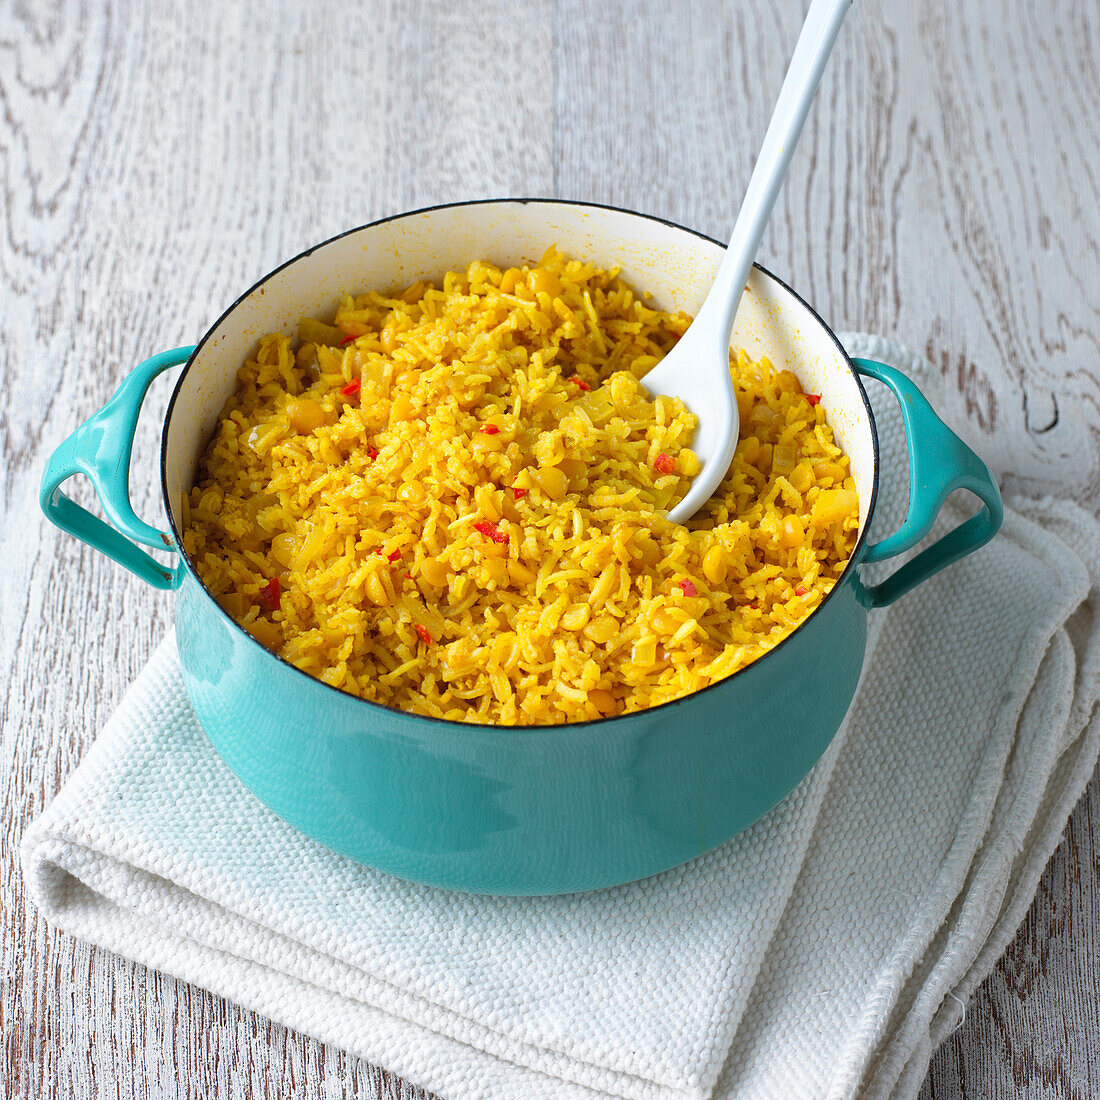 Oven baked pilaf rice